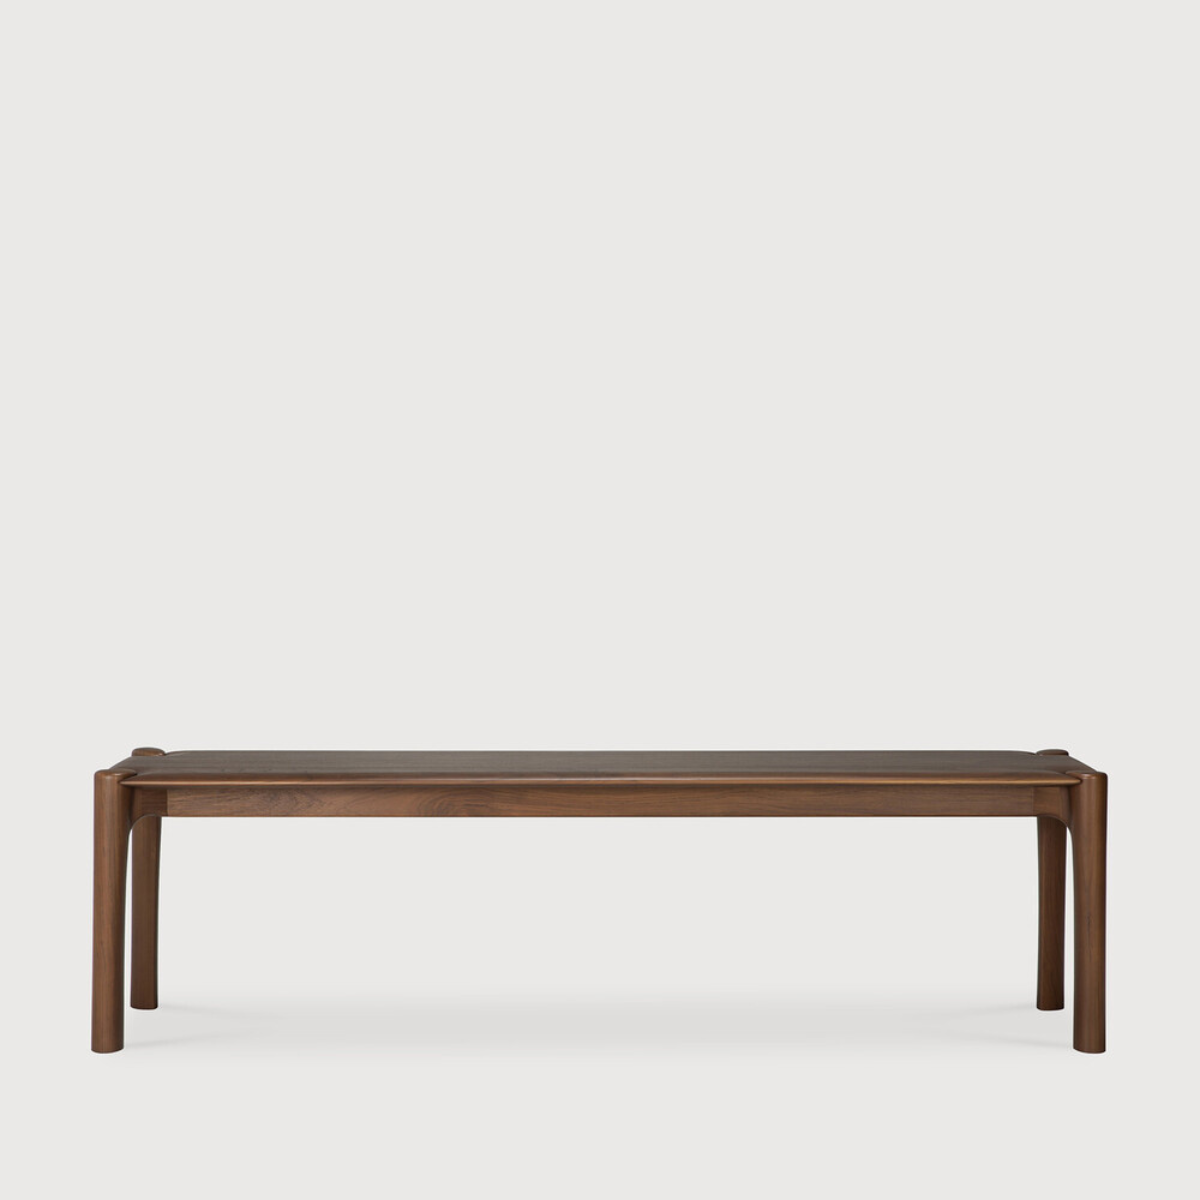 pi bench by ethnicraft on adorn.house